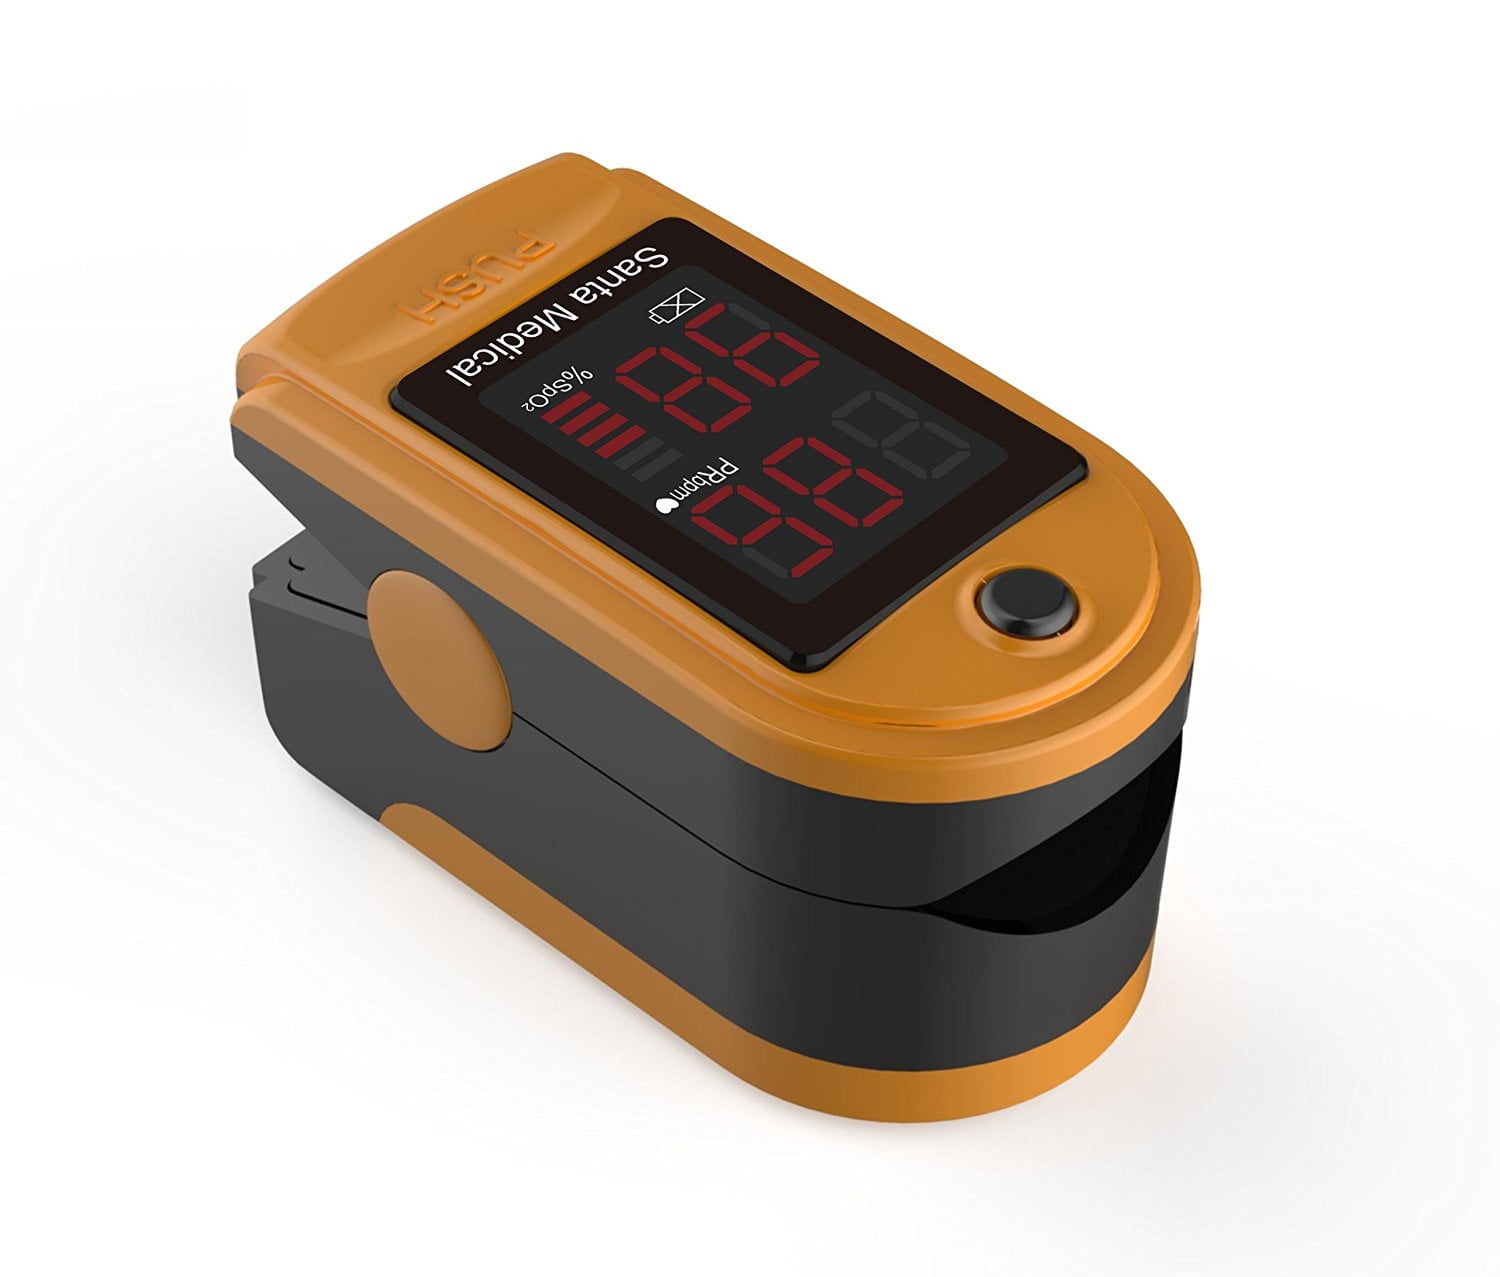 pulse oxometer